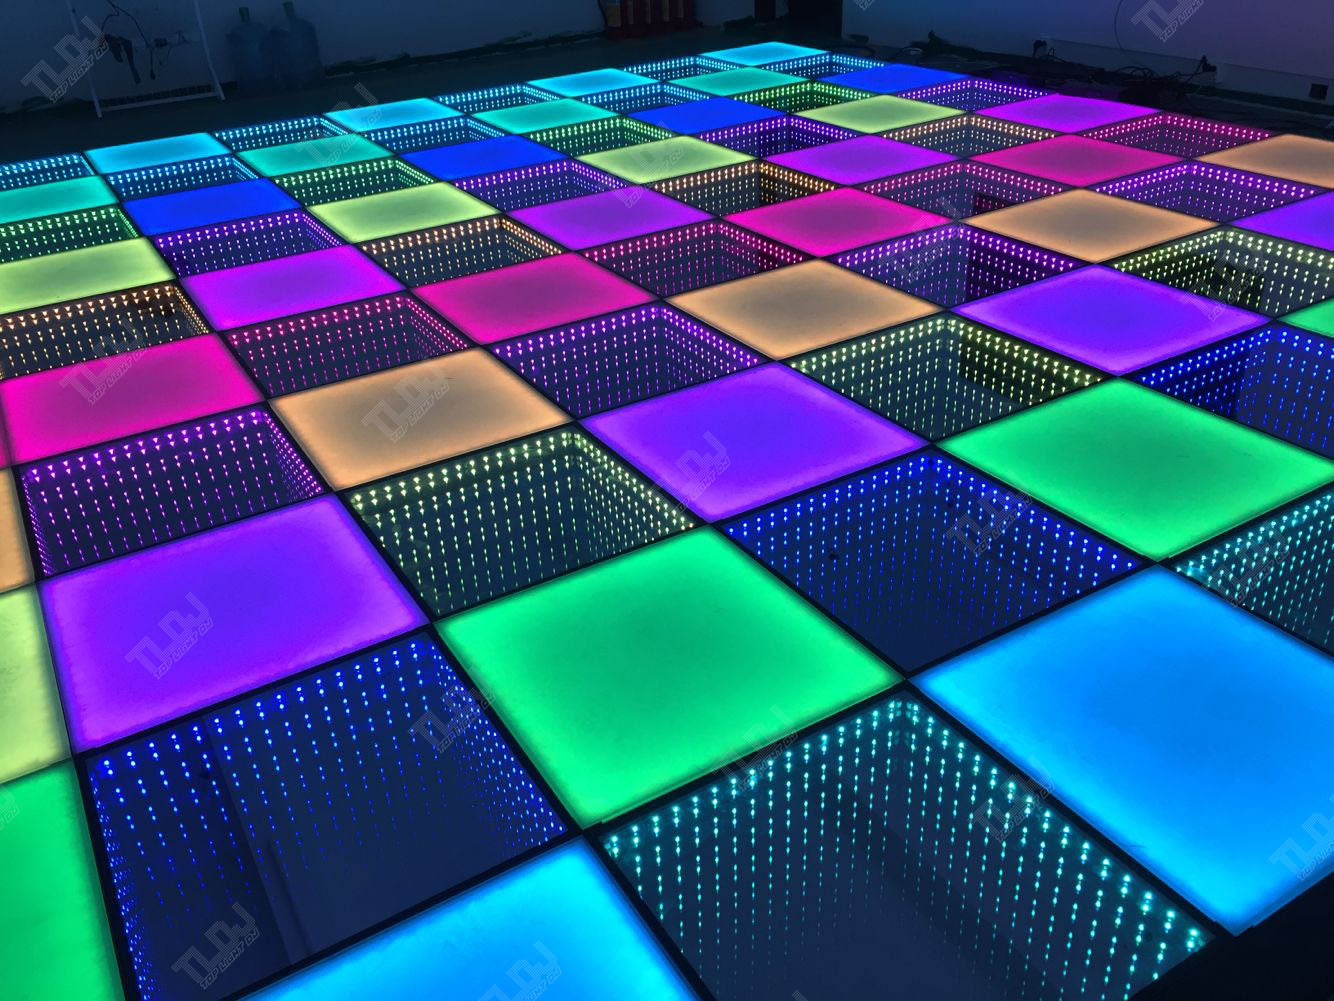 10x10ft 36 Panels 3D Infinity & Solid Top Light DJ Wireless LED Disco Dance Floor – Strong, Durable, and Water Resistant